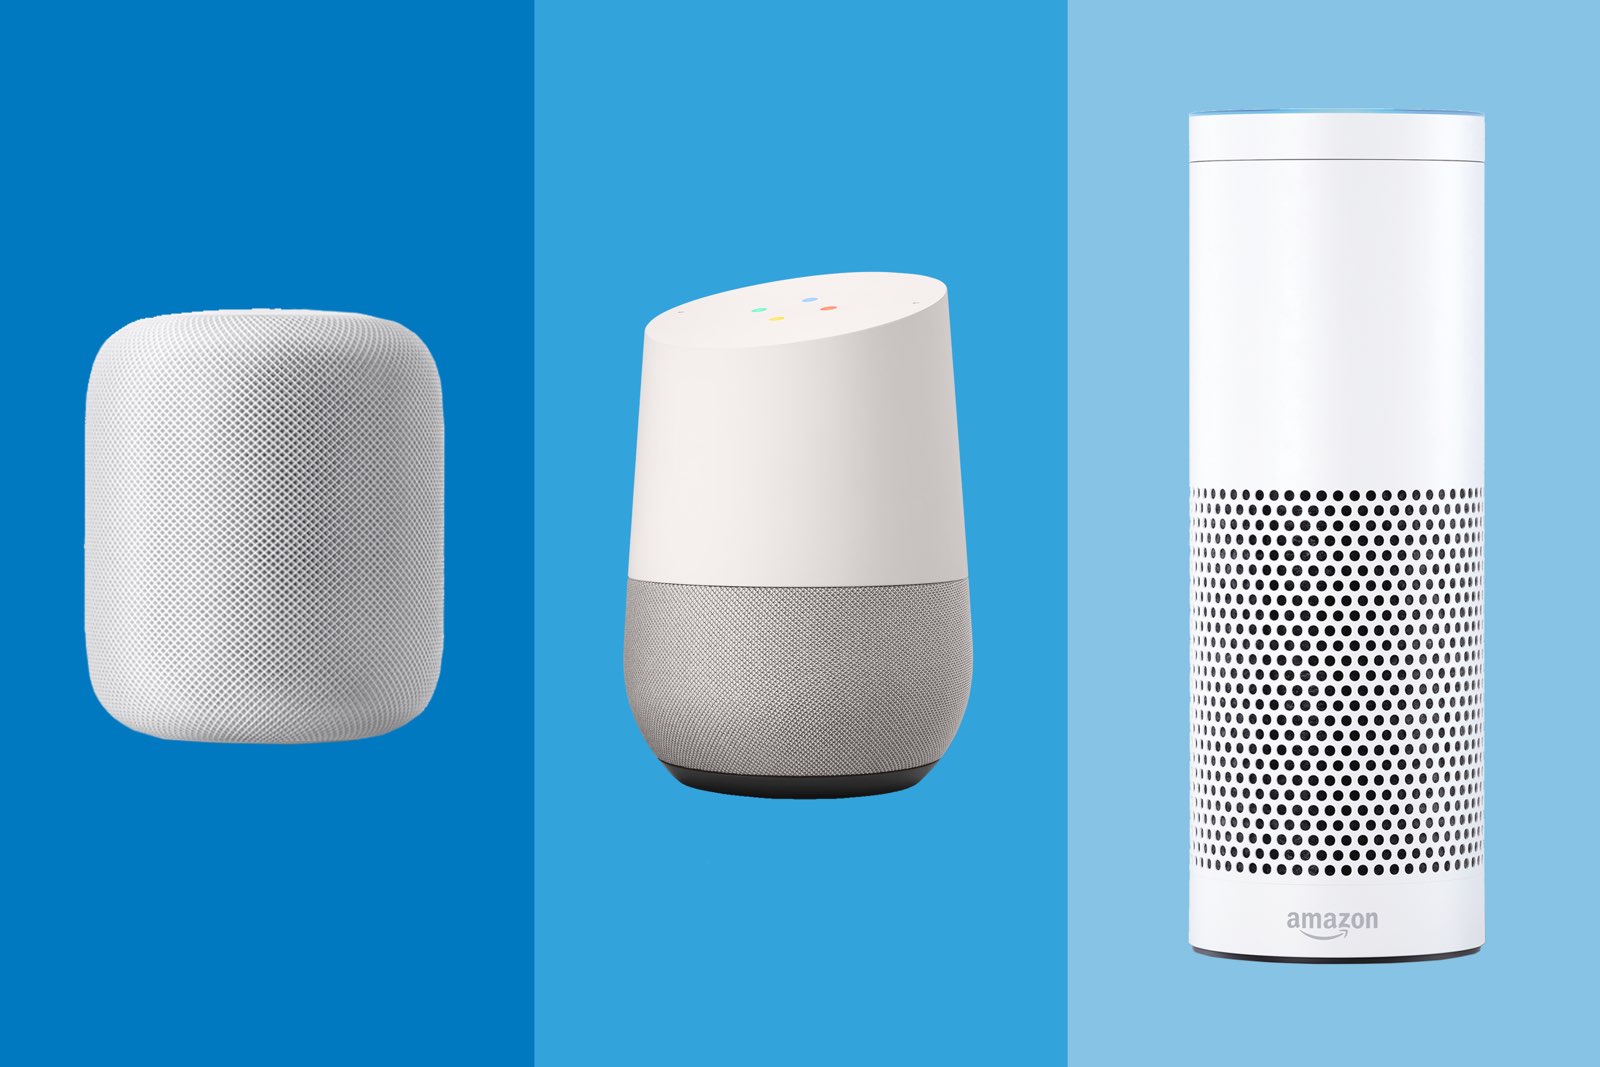 What's the best voice assistant for me?